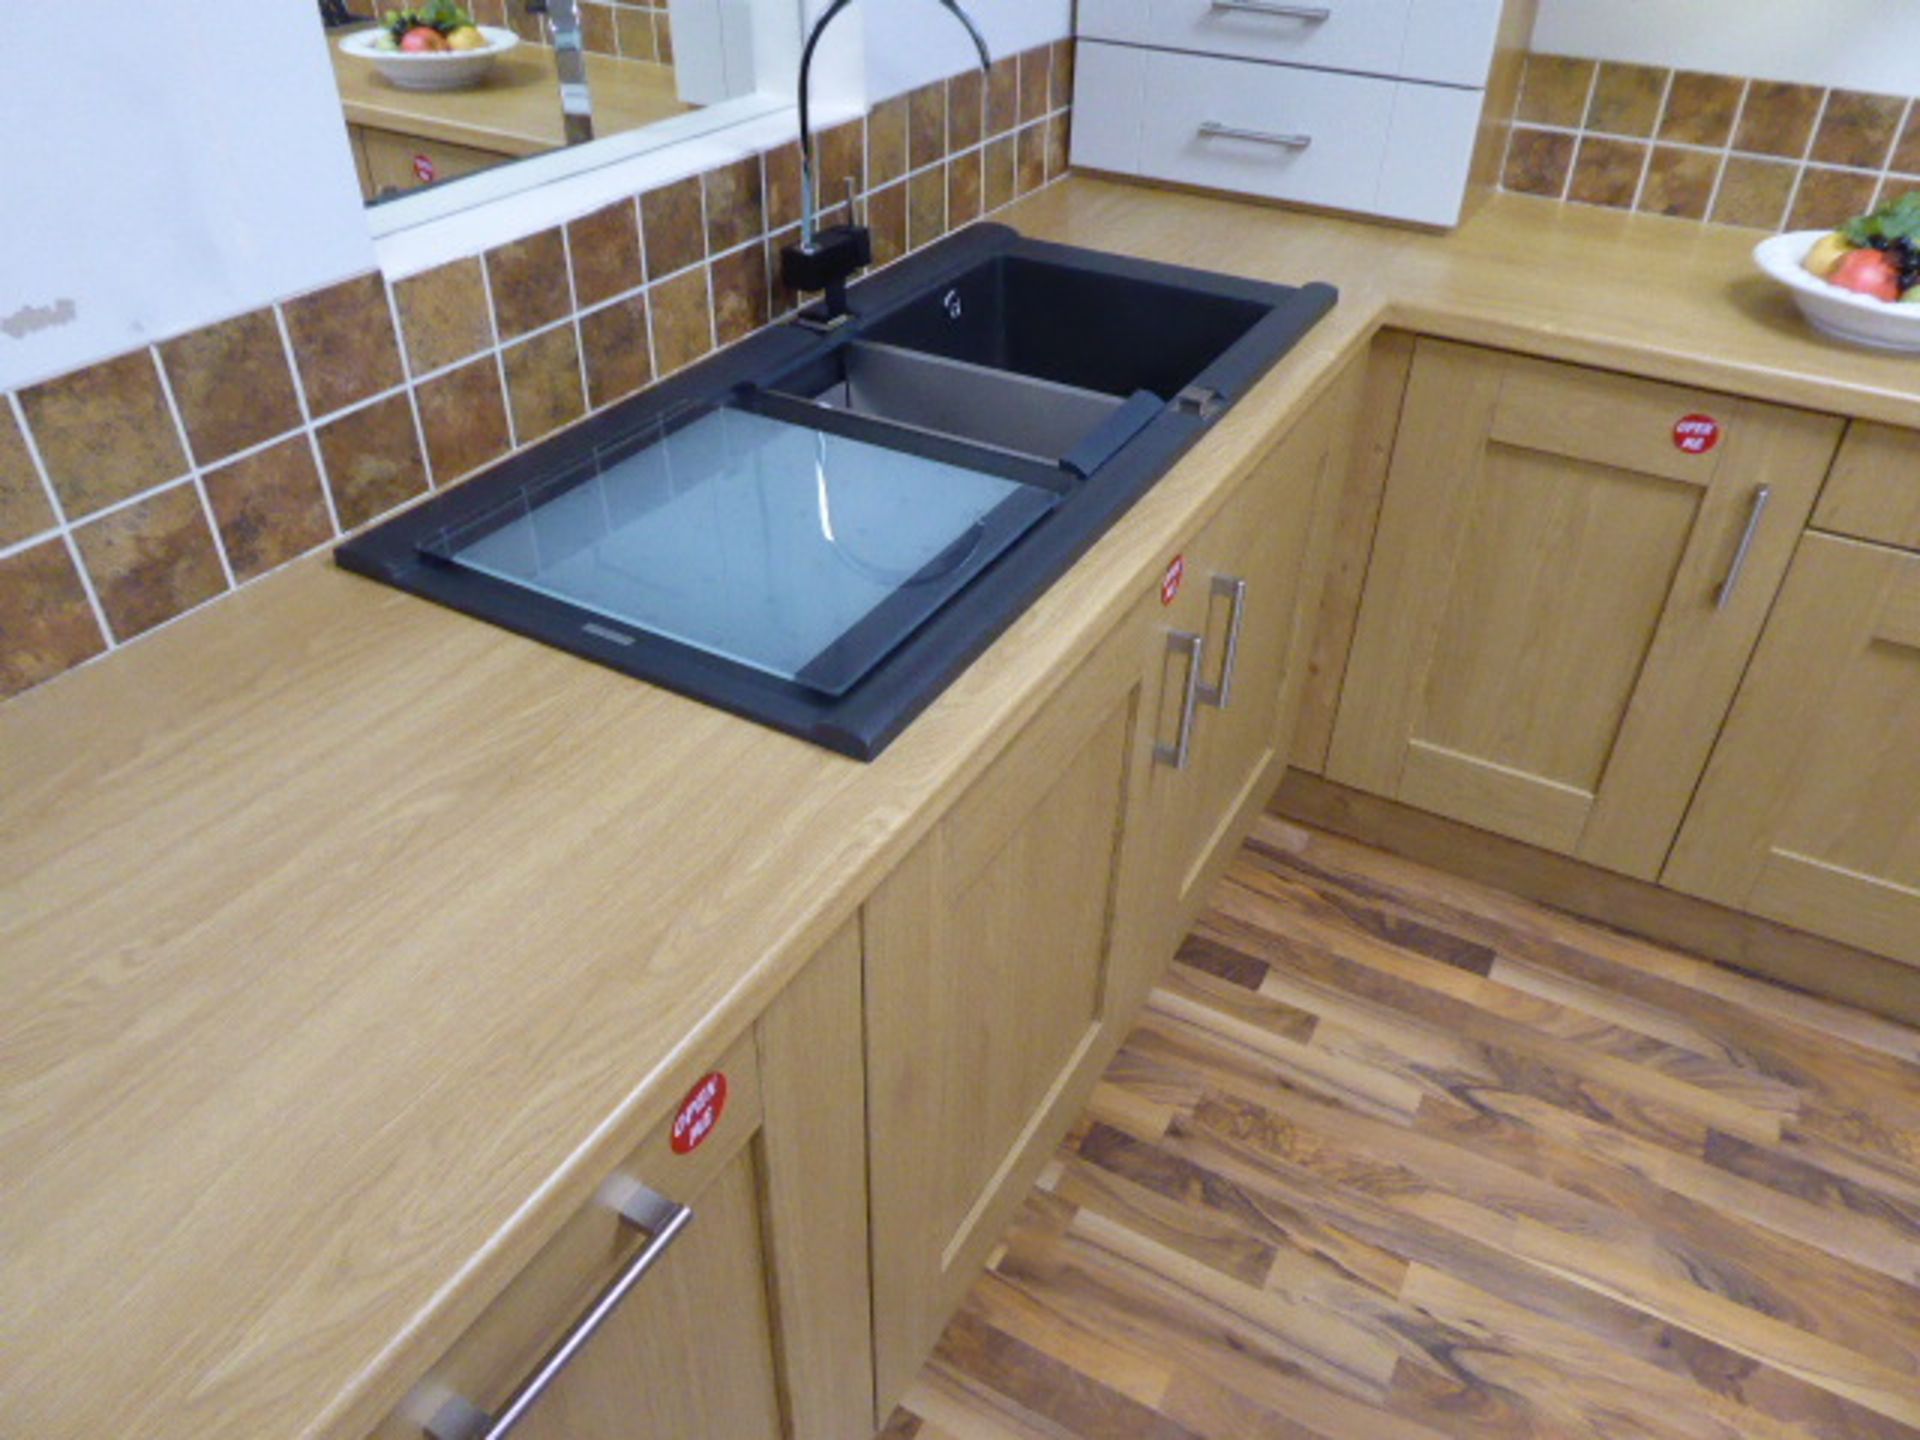 Milbourne oak and almond kitchen with oak effect laminate worktops. Max measurement is 390cm x - Image 2 of 13